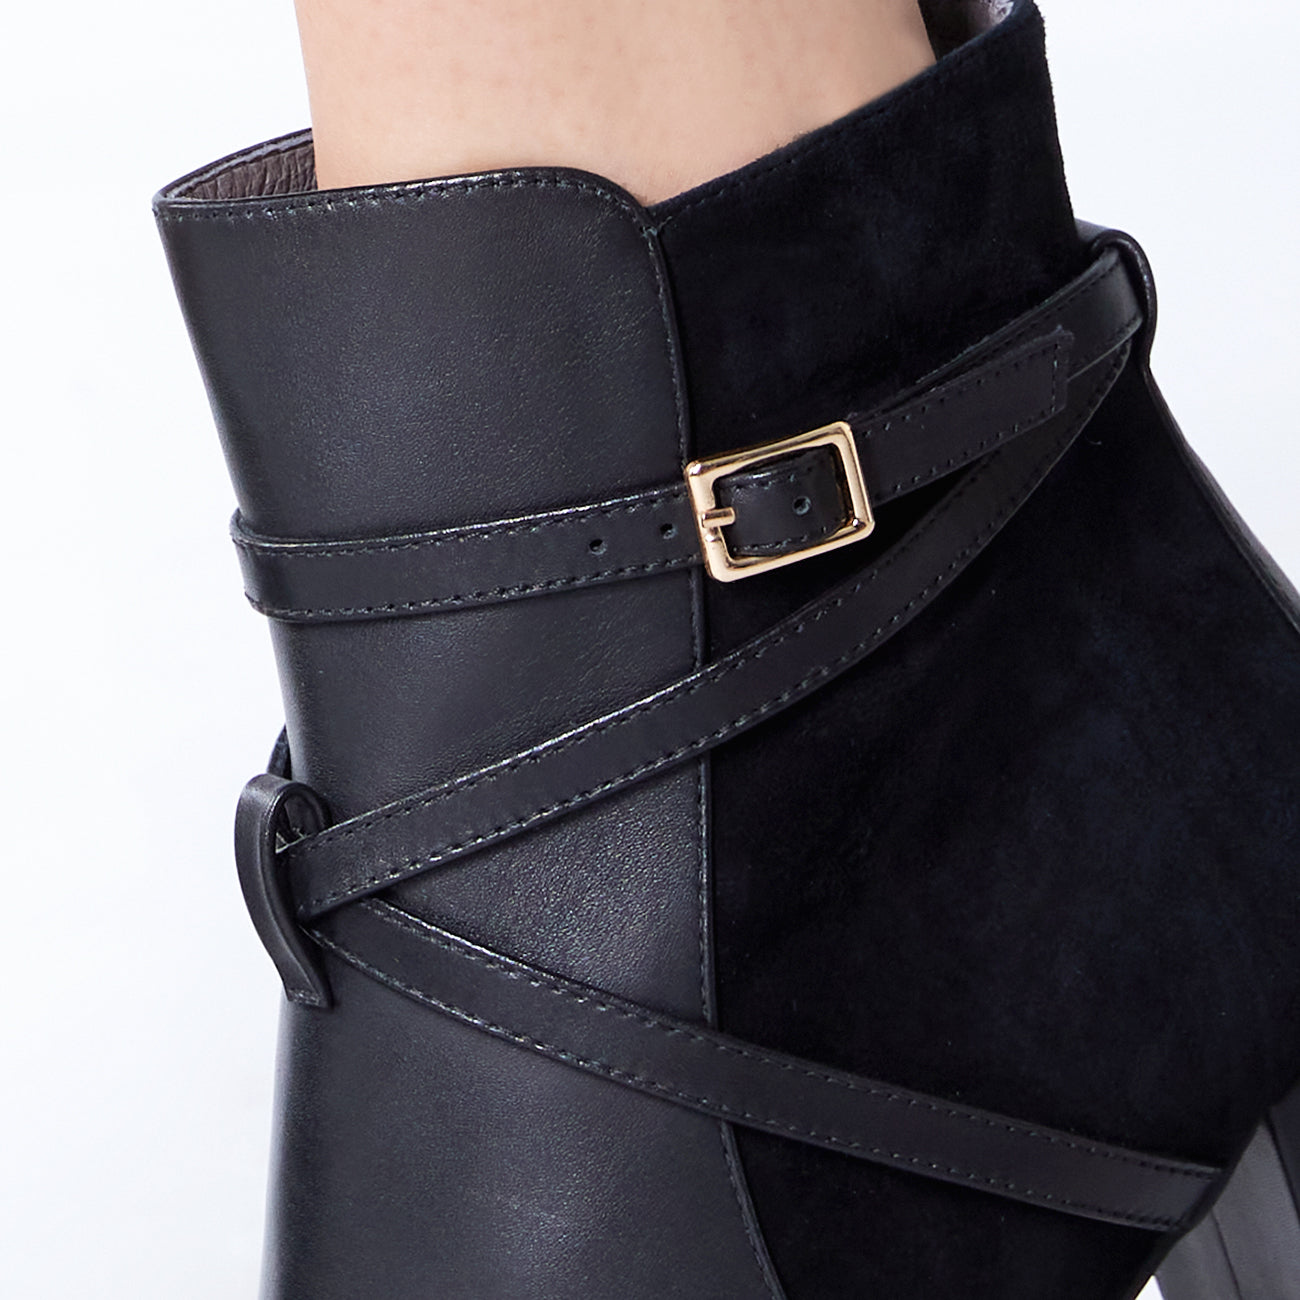 Esme Ankle Boot 80mm | Black combo